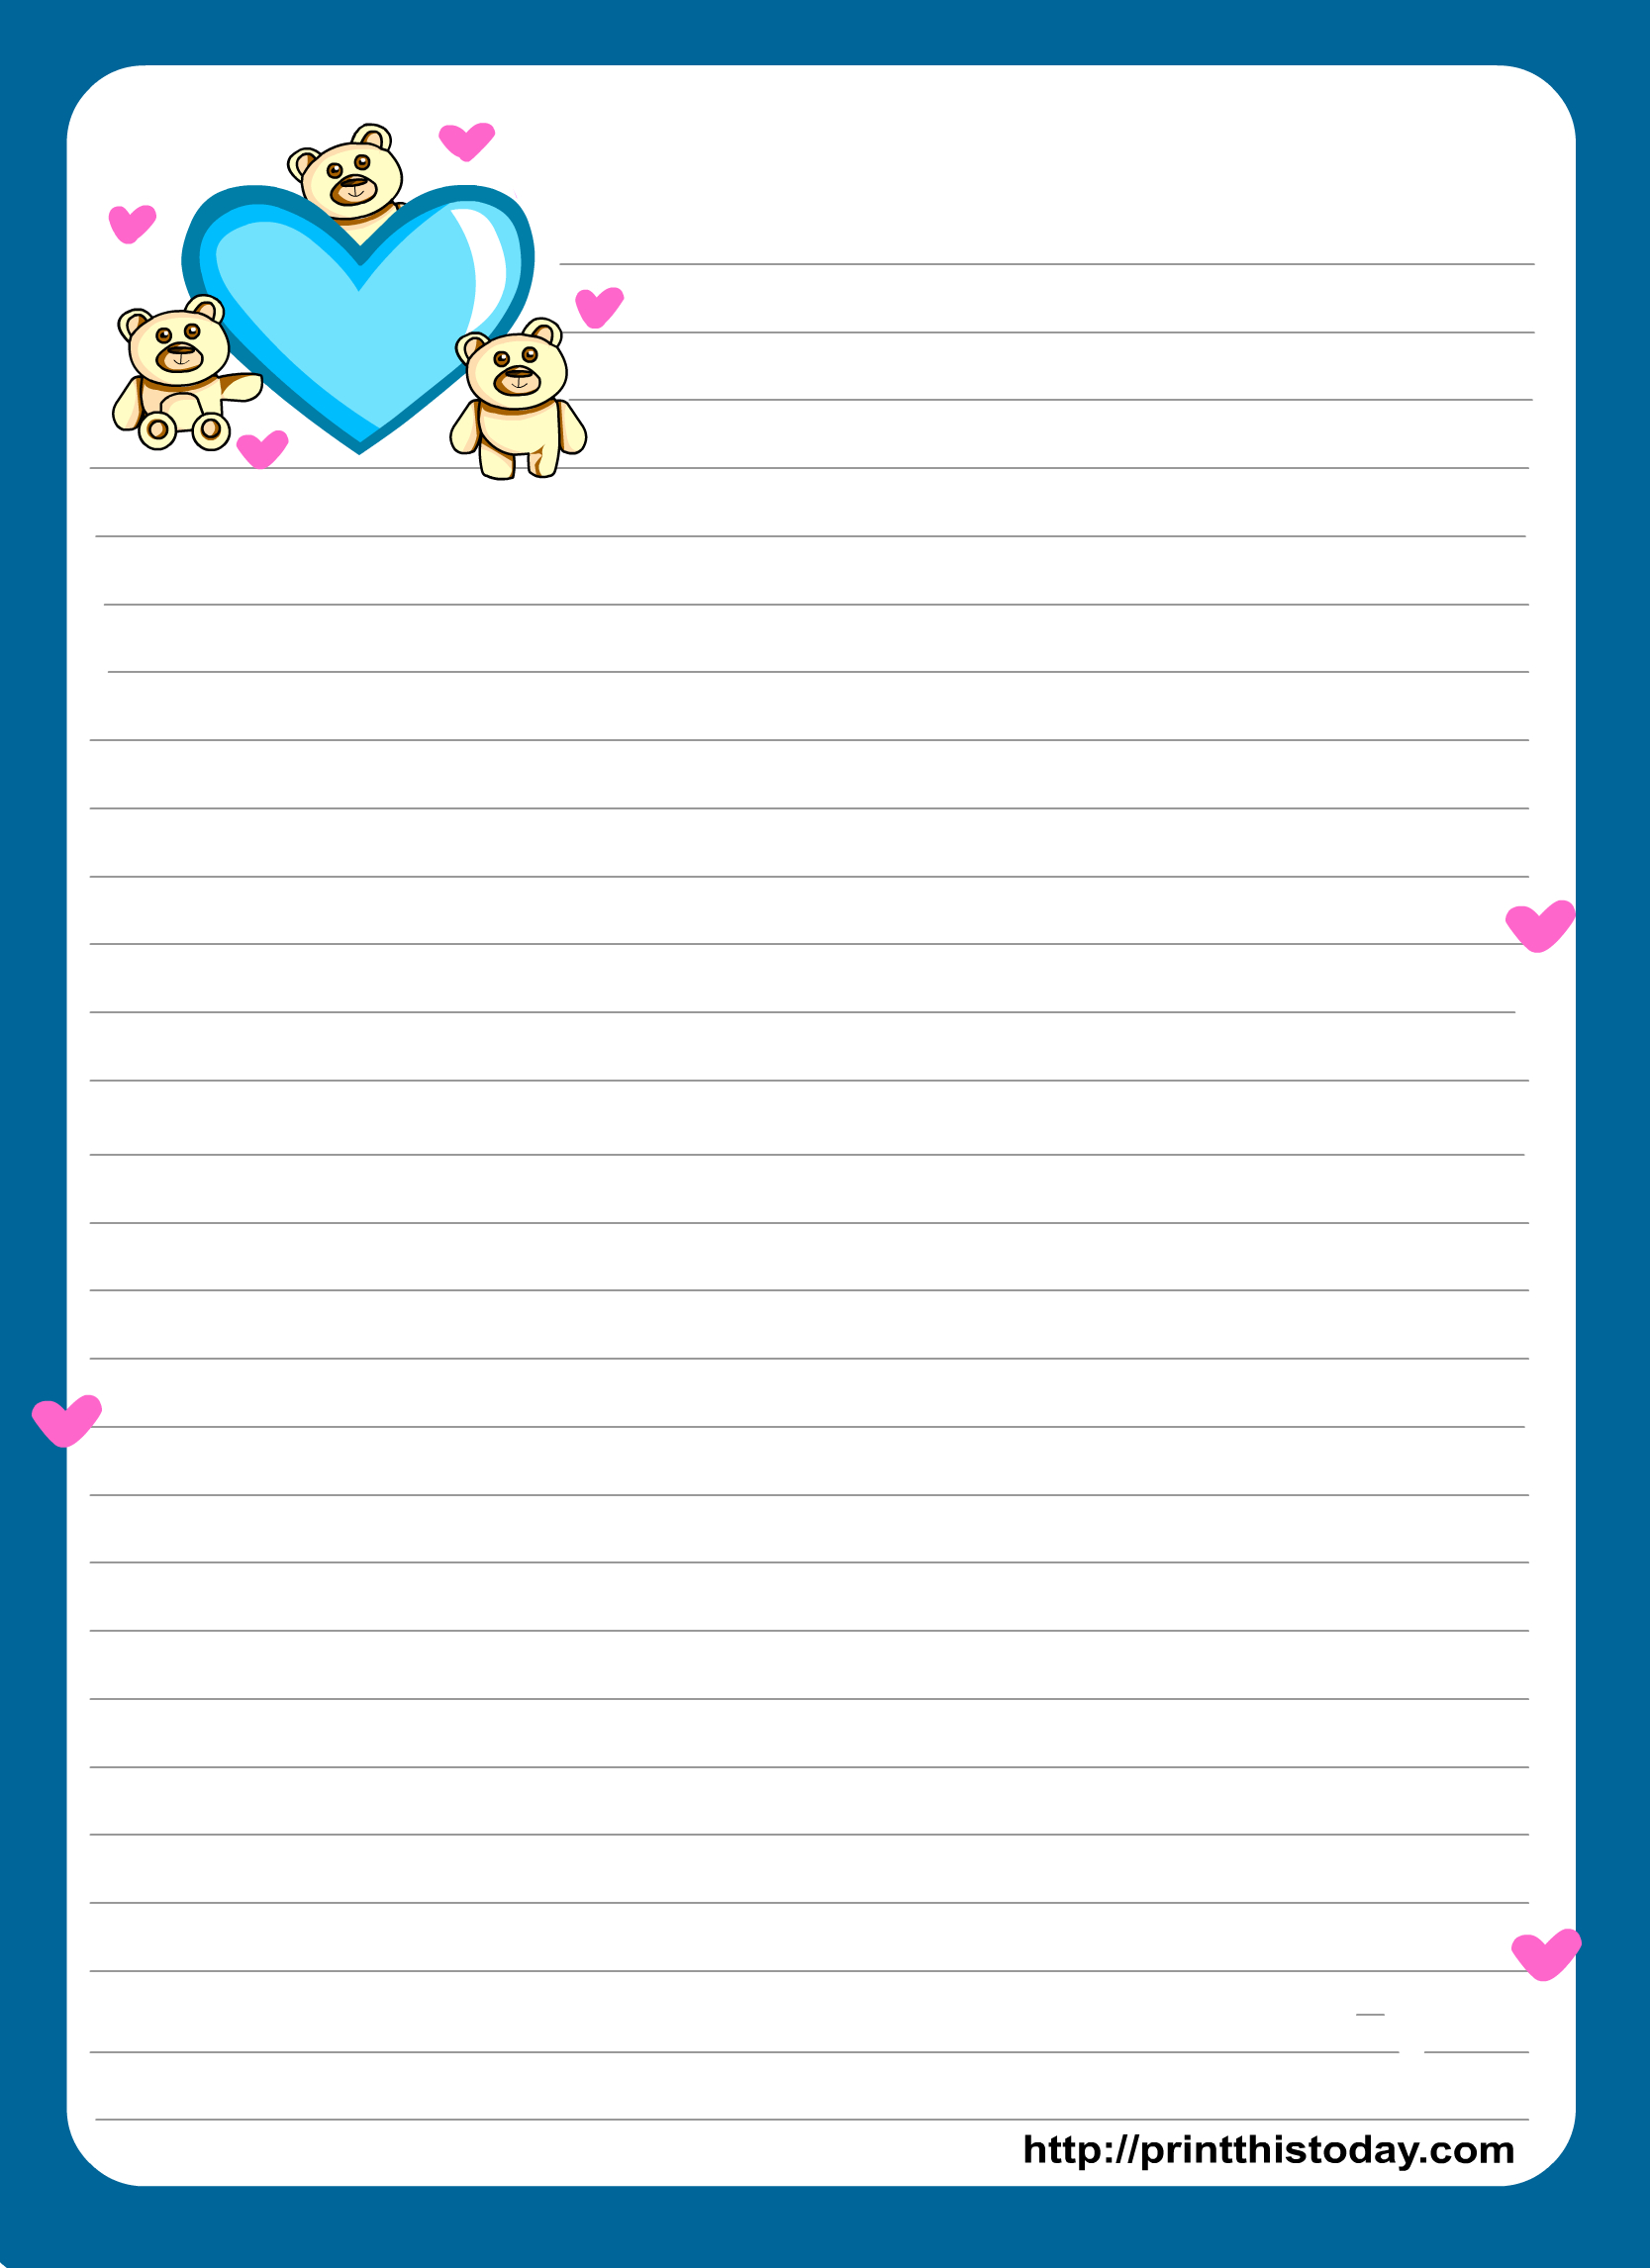 Miss You Love Letter Pad Stationery | Lined Stationery | Free - Free Printable Lined Stationery